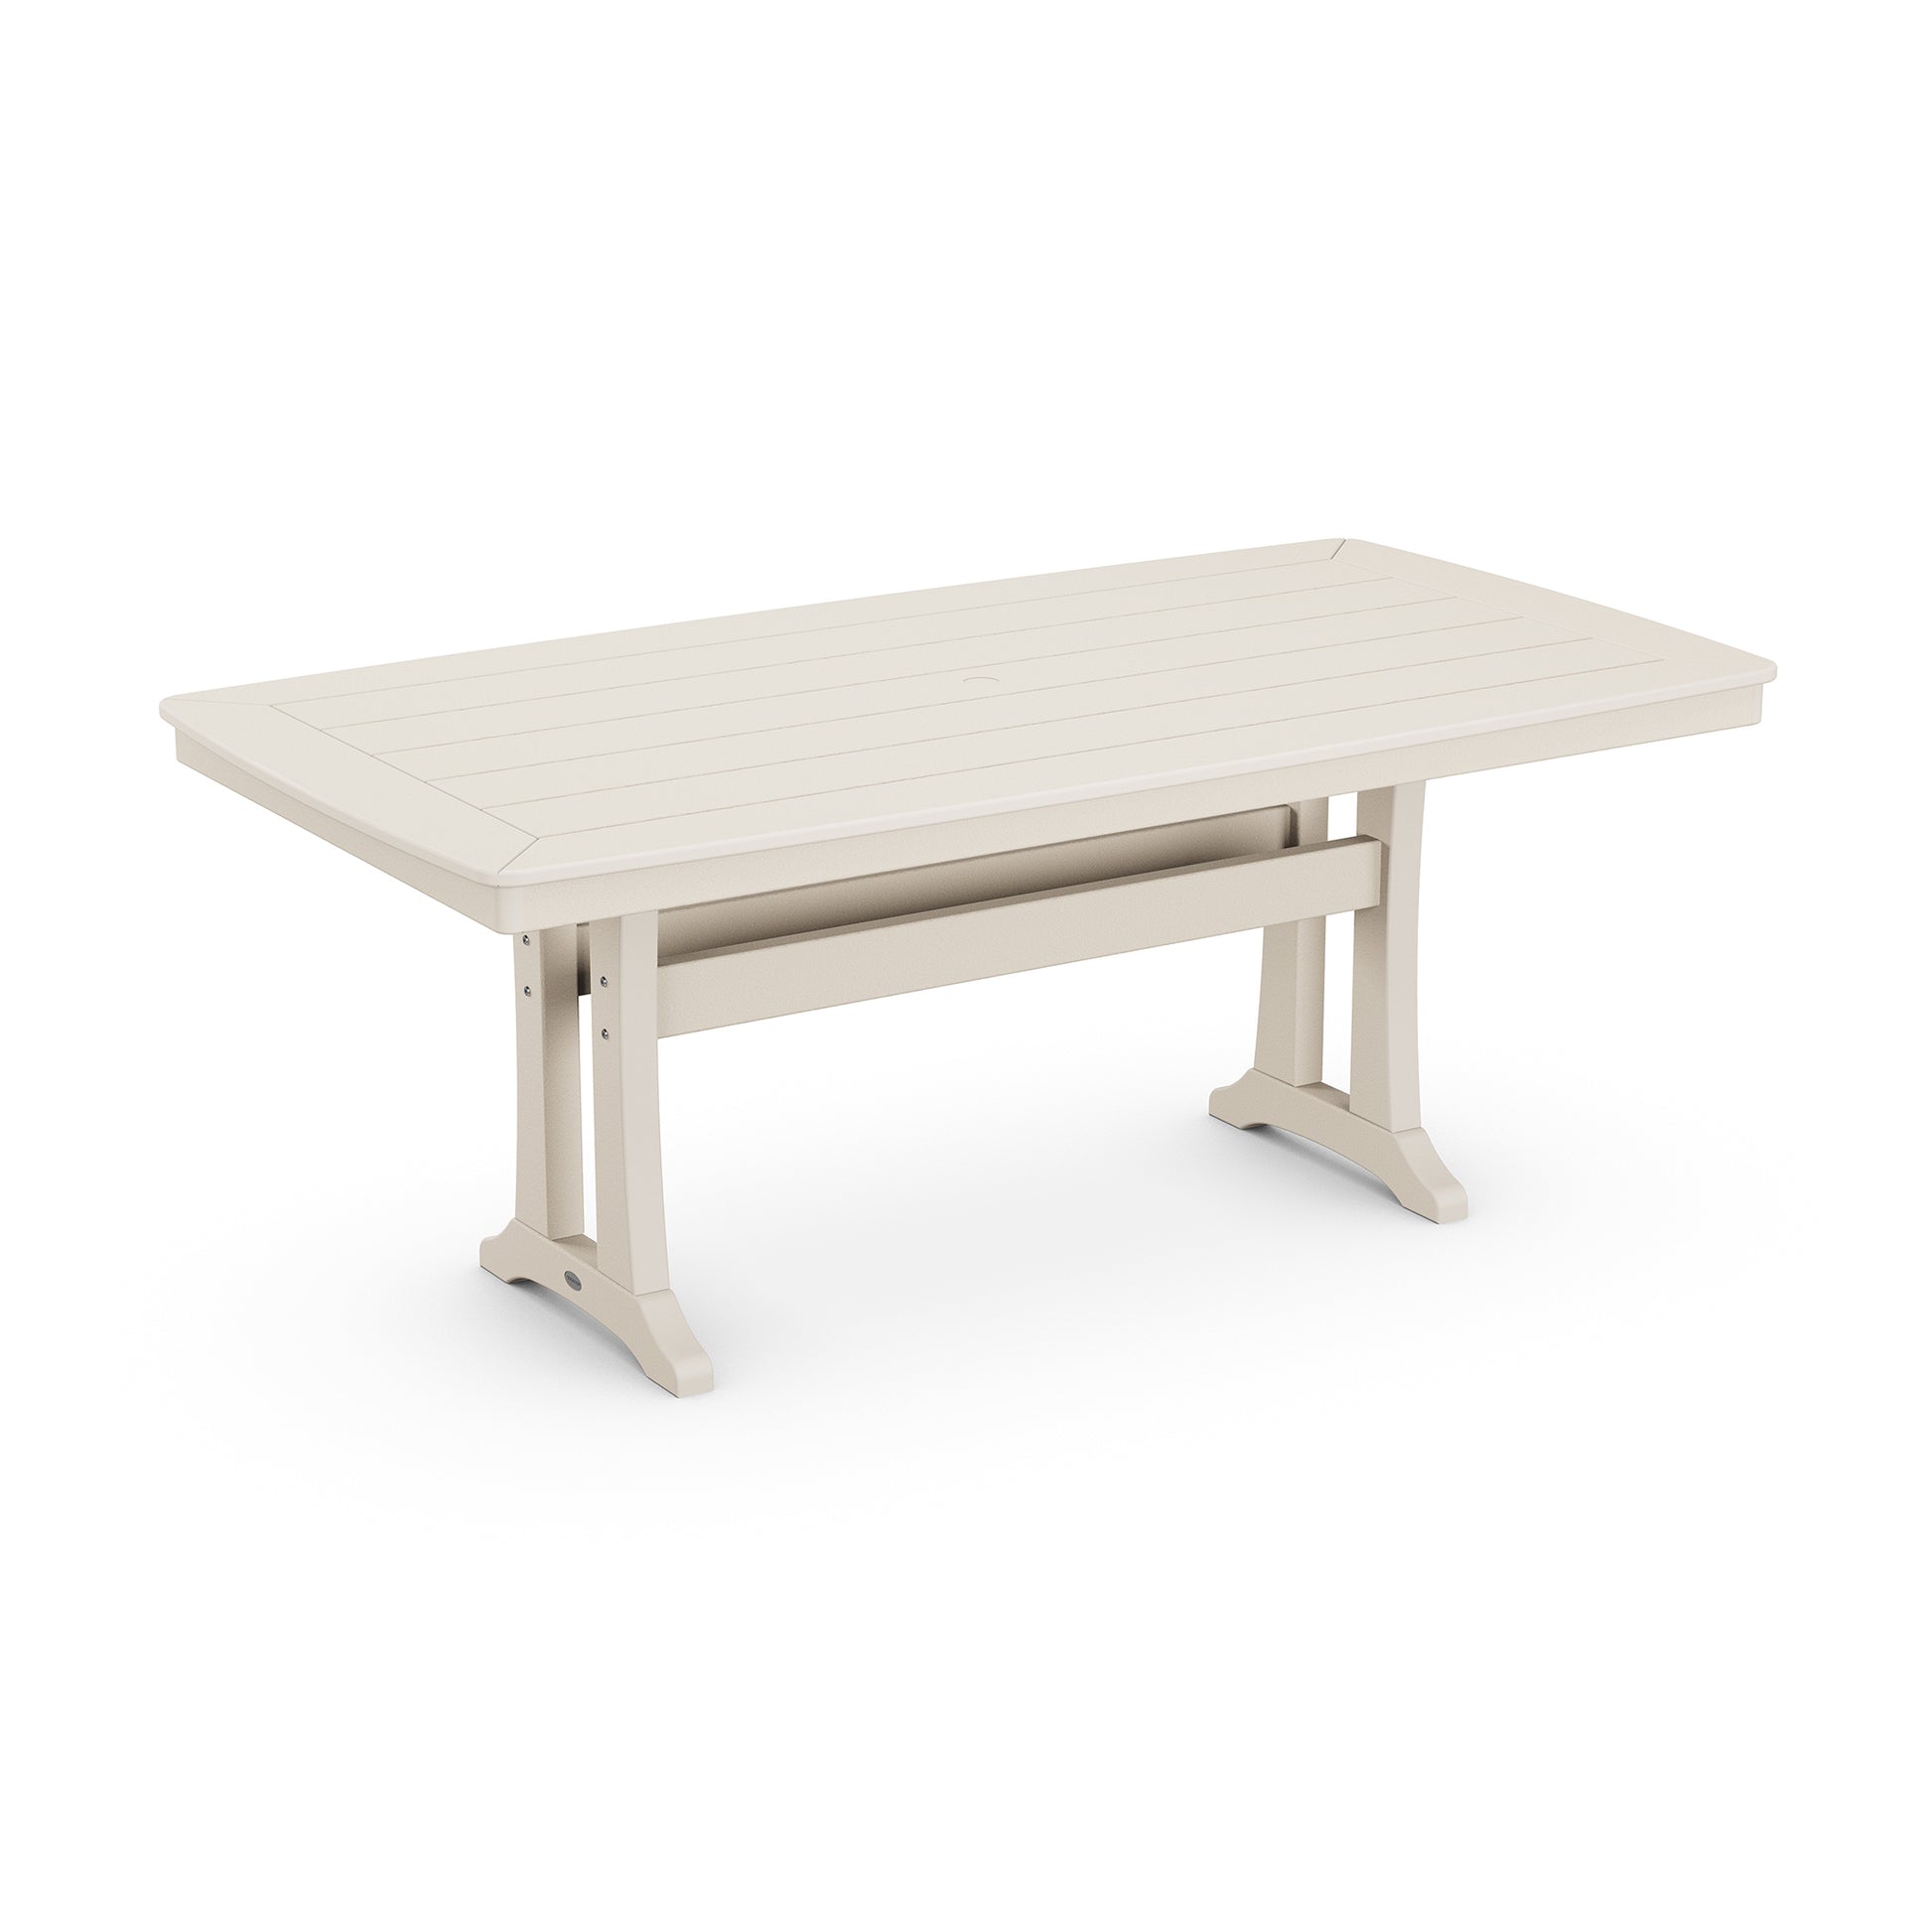 A modern, beige POLYWOOD Nautical Trestle 38" x 73" Dining Table with a rectangular tabletop and trestle legs on either side. The table includes a modesty panel and control buttons for height adjustment.